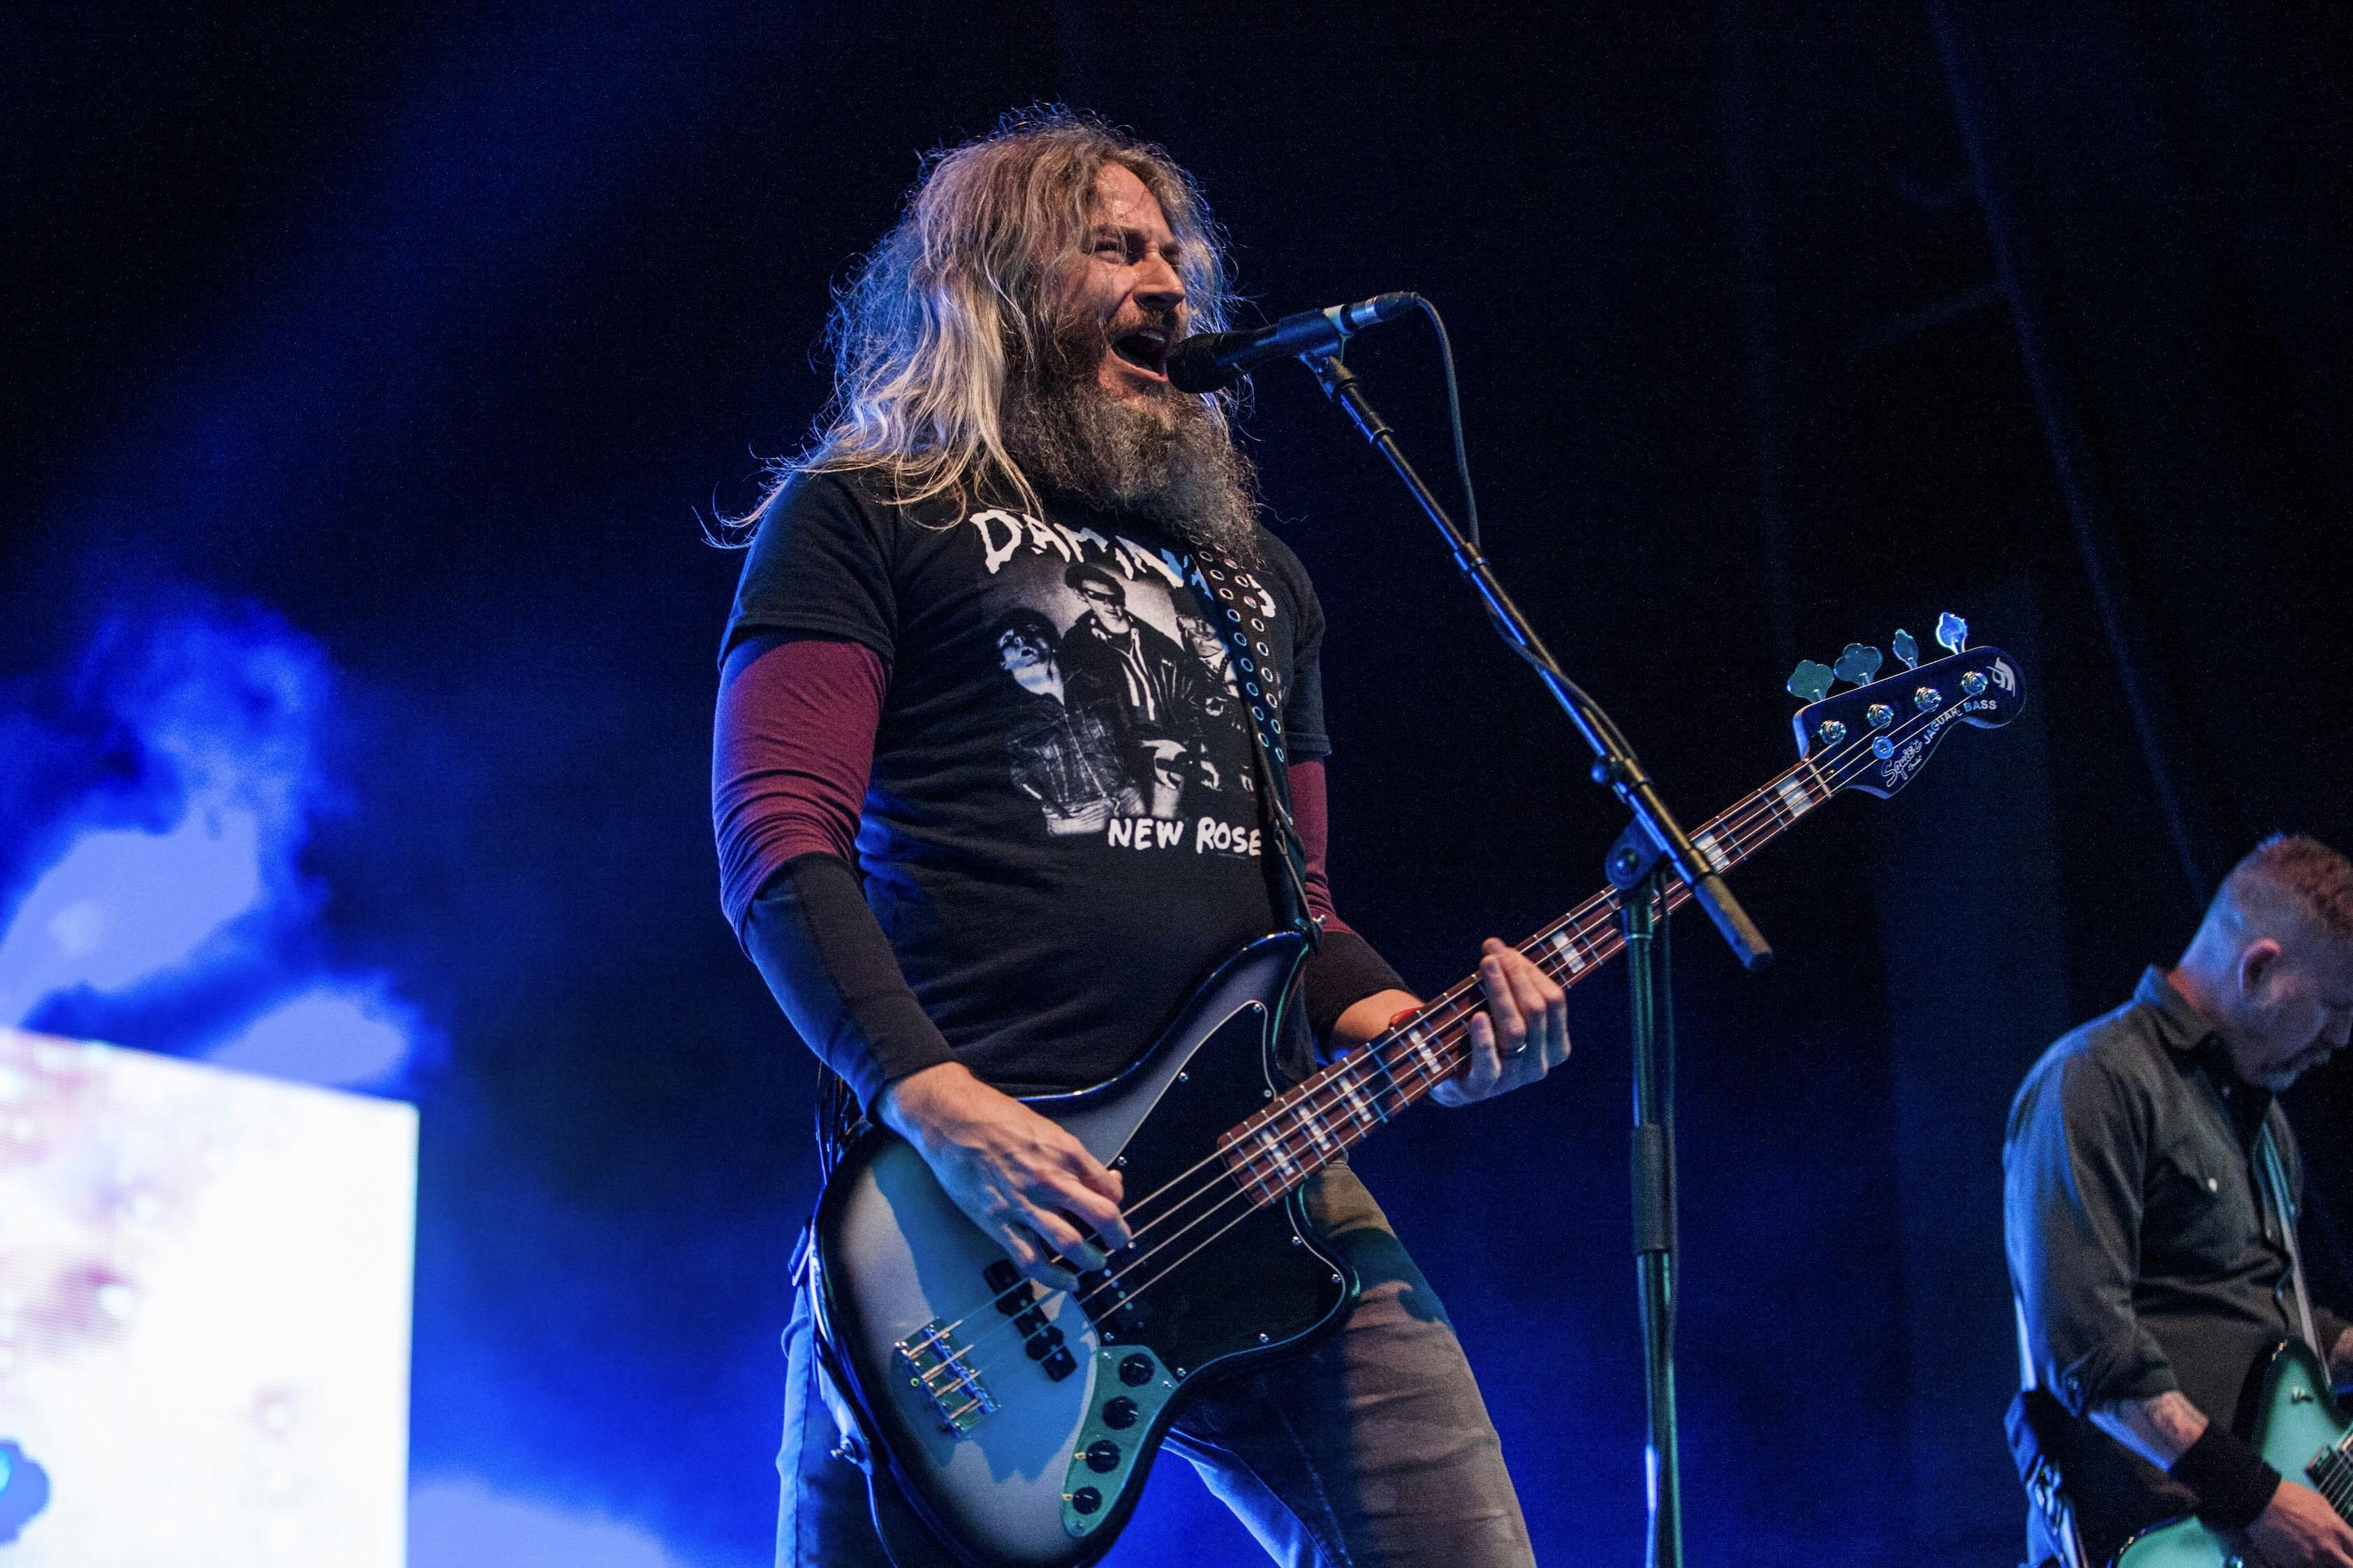 Mastodon's Troy Sanders: "We Went From Crashing On Cat-Littered Floors To Playing The Biggest Stages With All Of Our Heroes"